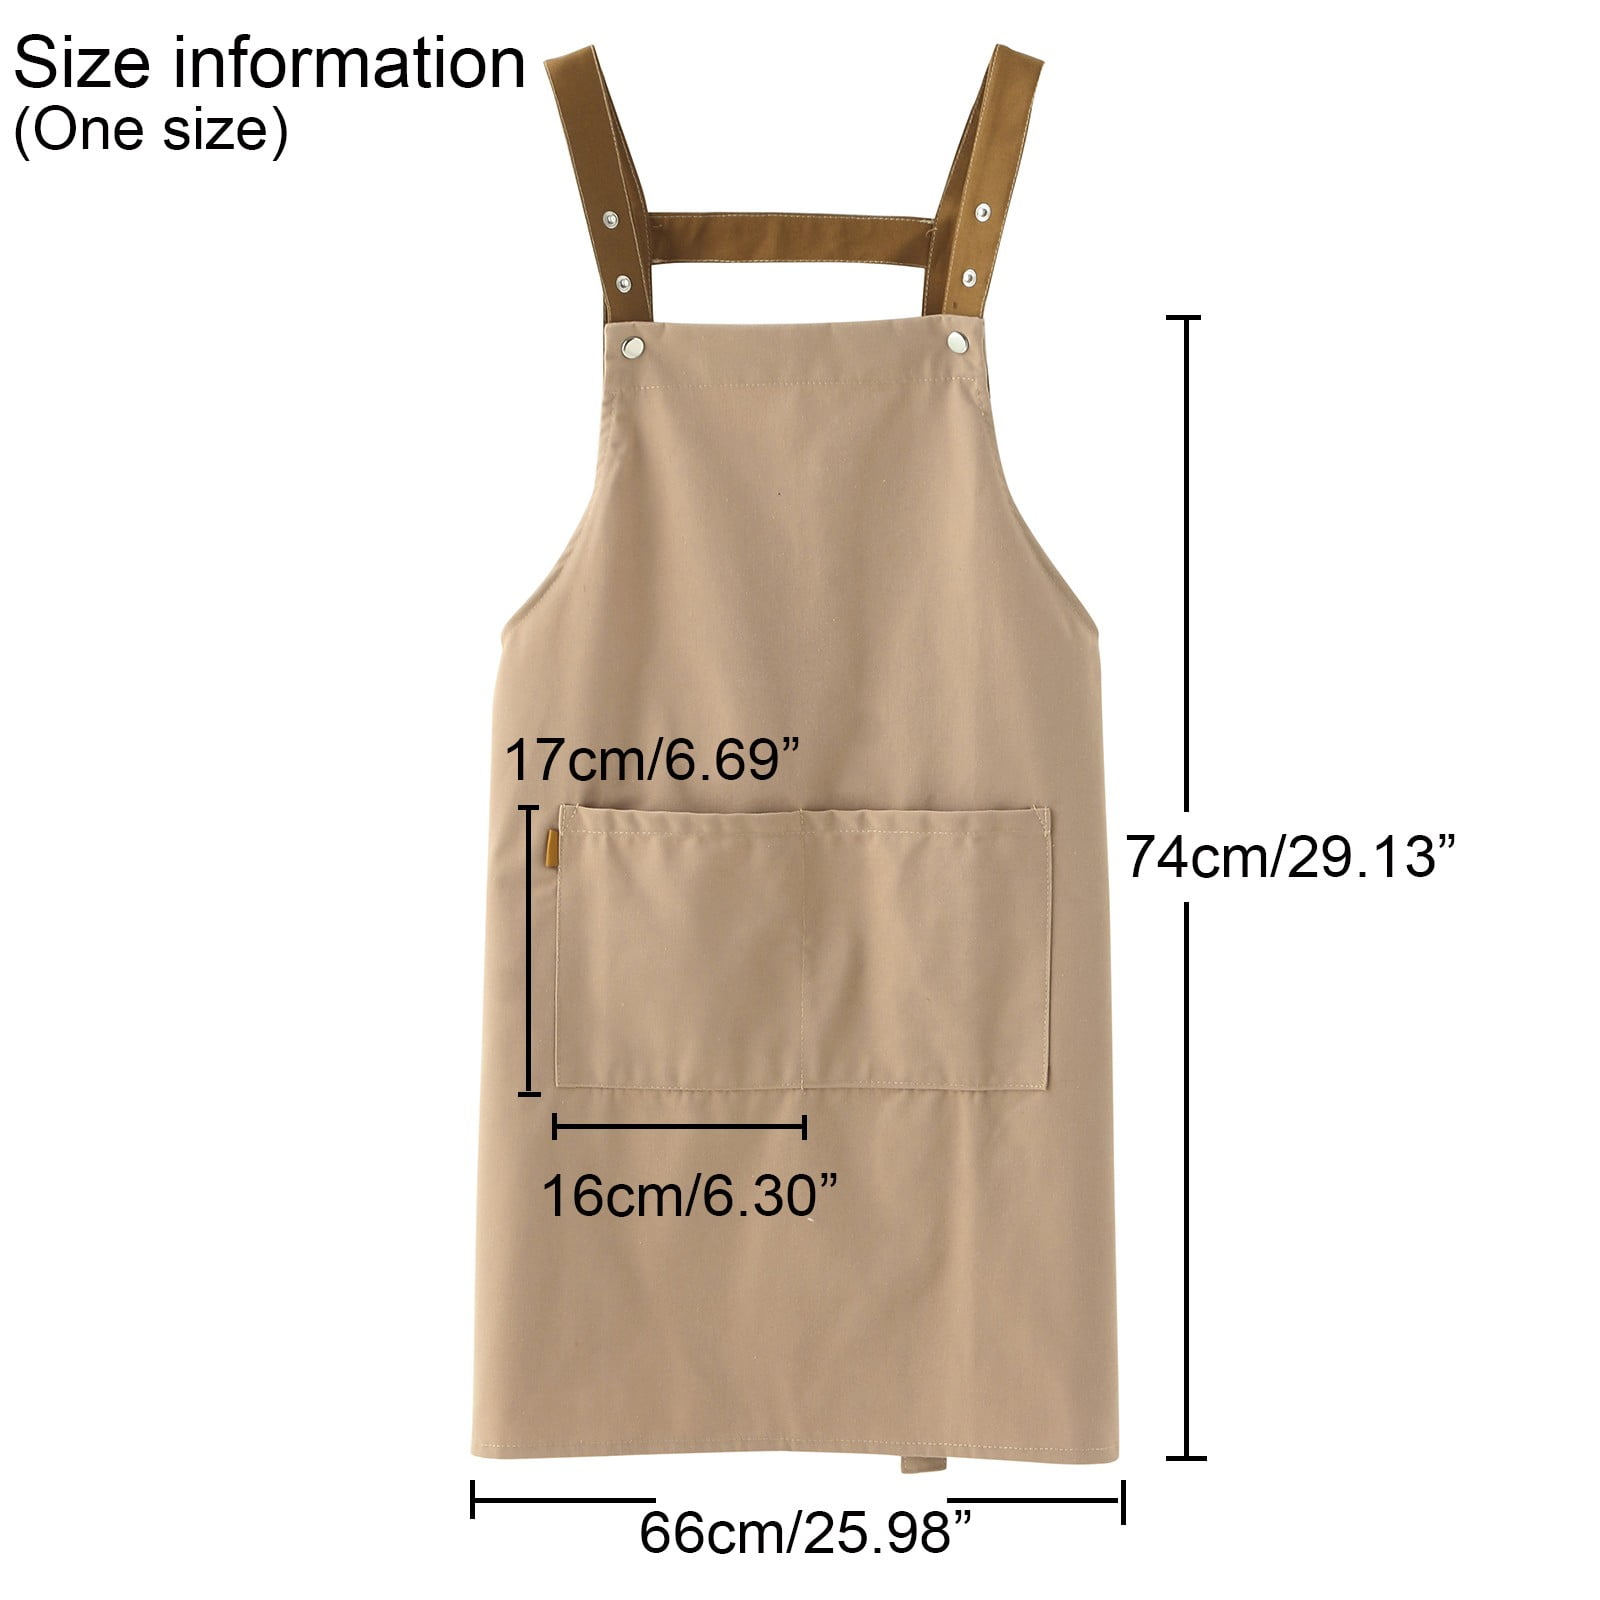 Food52 Adjustable Apron with Pockets, Linen & Cotton, 3 Colors on Food52